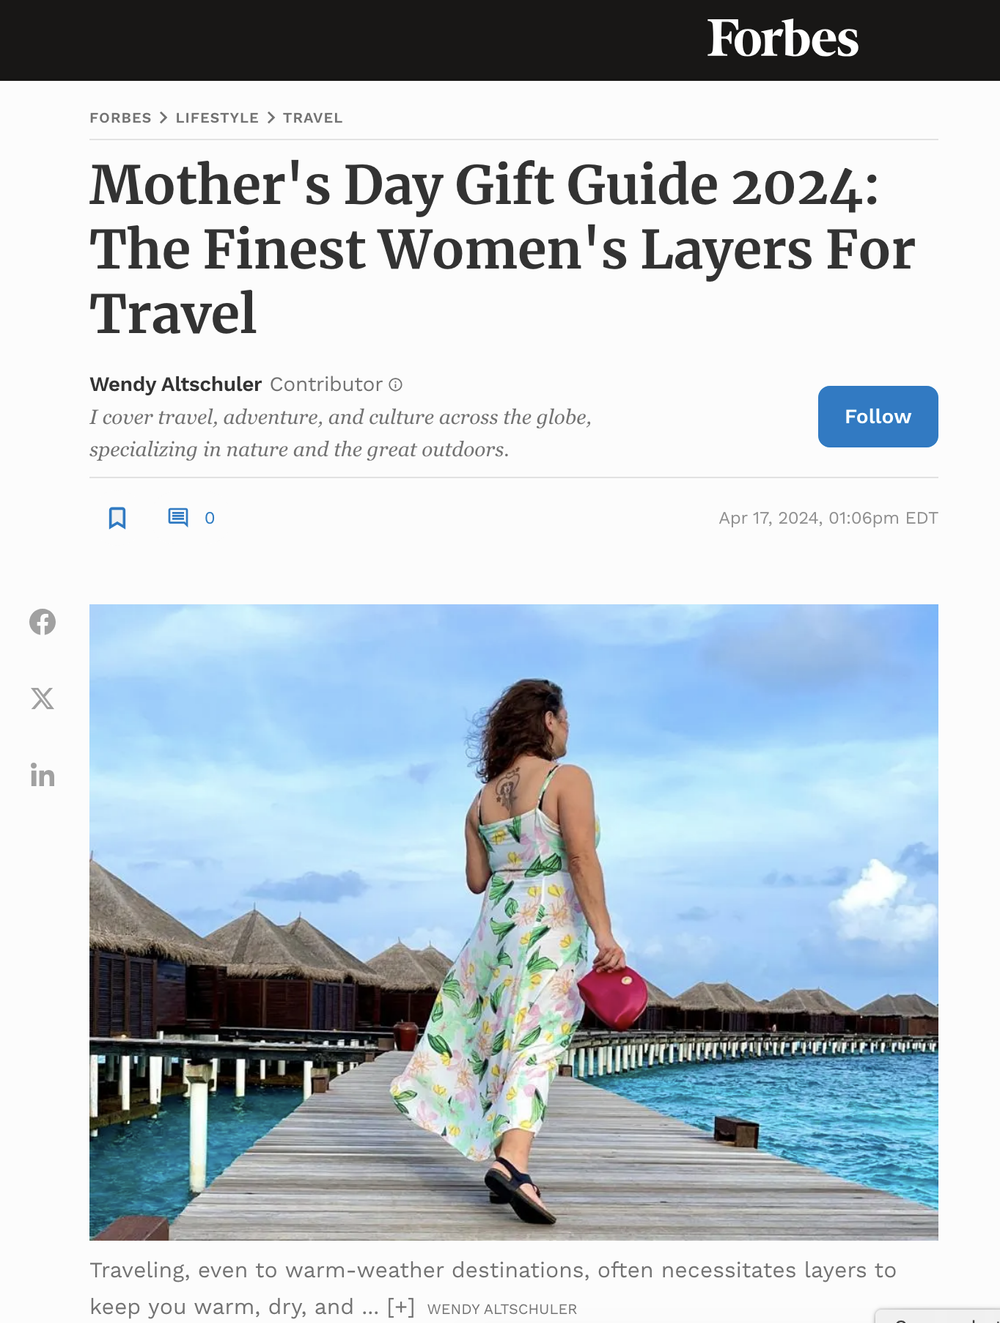 Mother's Day Gift Guide 2024: The Finest Women's Layers For Travel